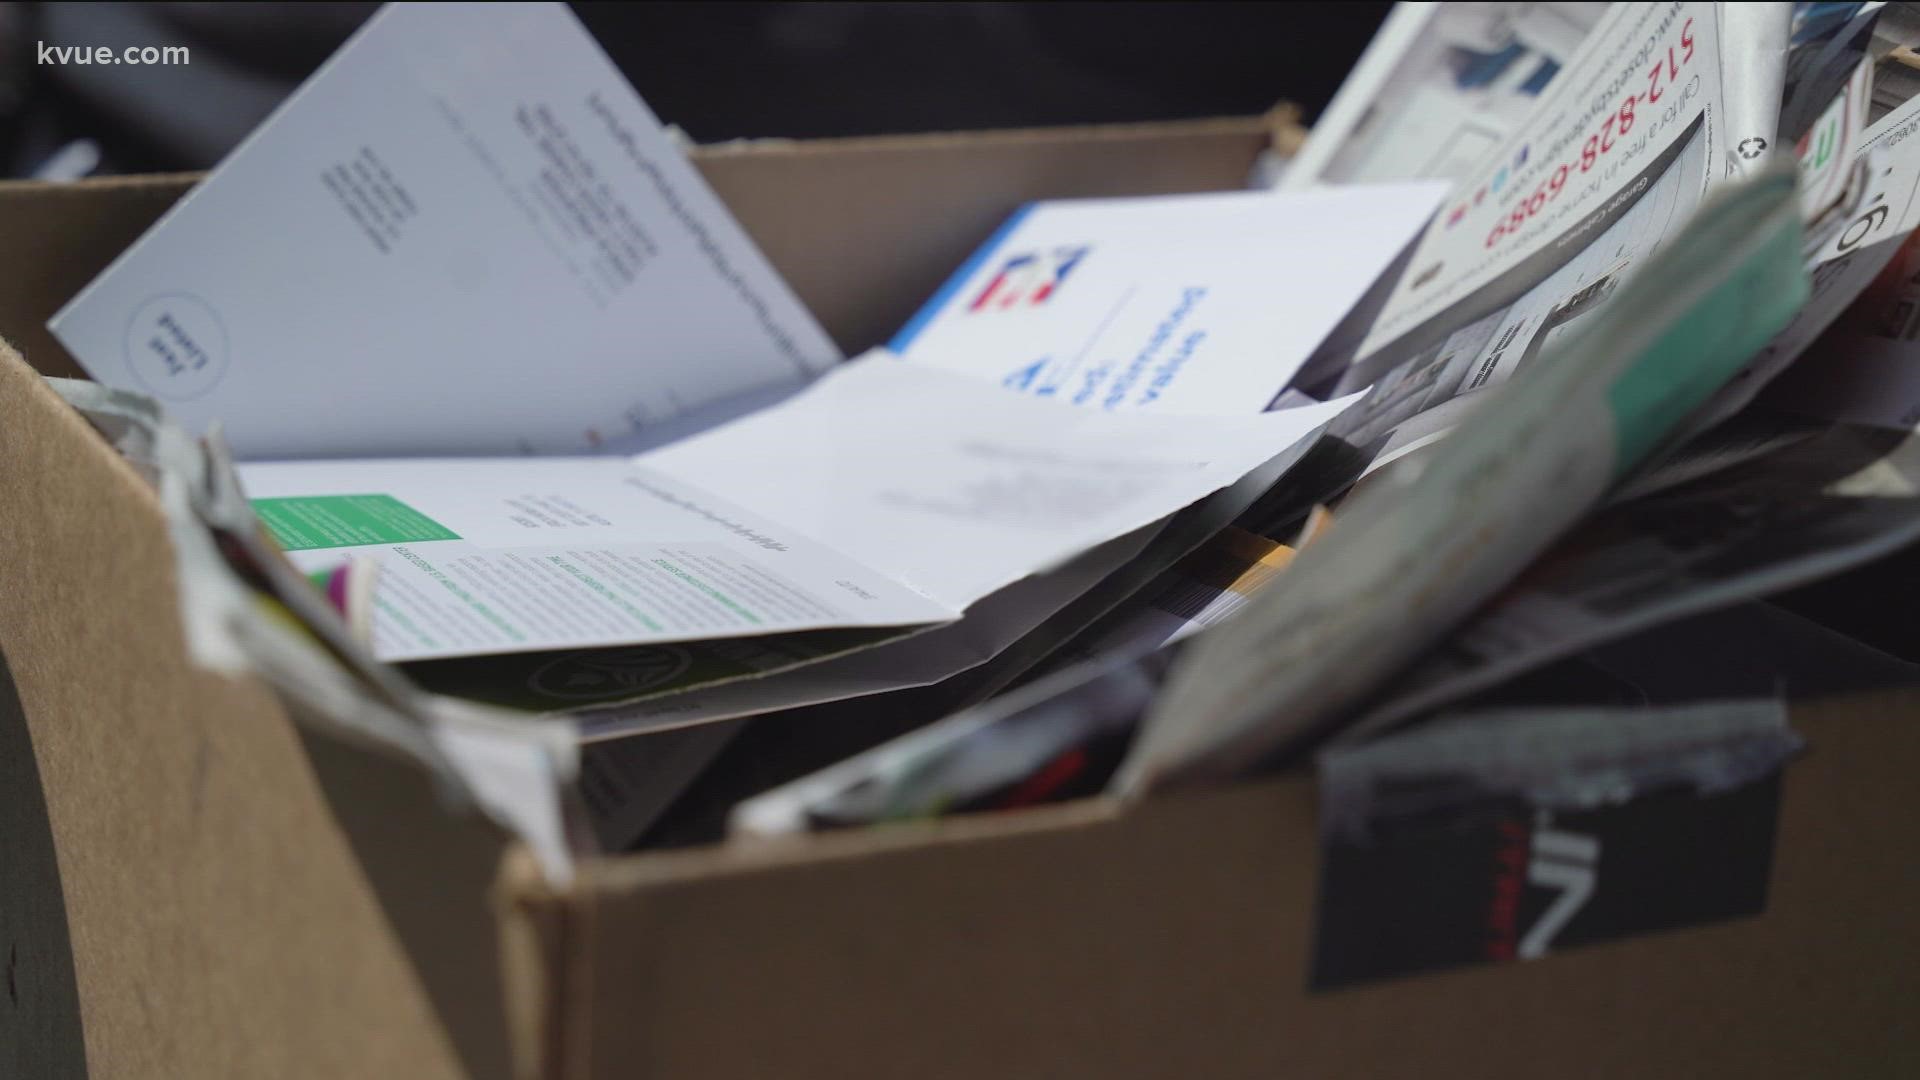 The KVUE Defenders looked into why junk mail exists and why we might need it.